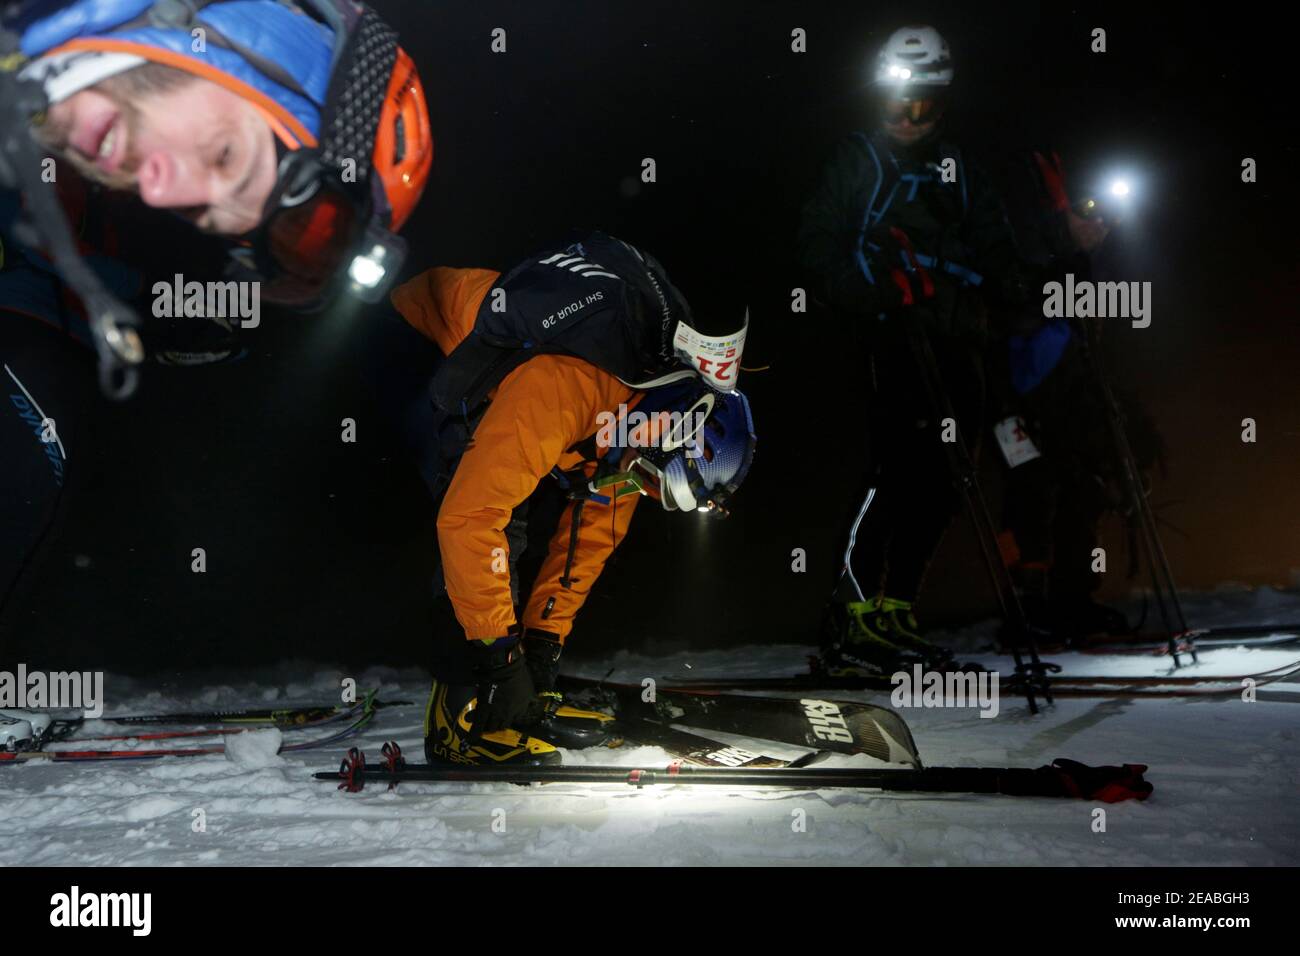 Szczyrk, Skrzyczne, Poland - February 6, 2021: Polish Cup in High Mountain Skiing Kuby Soinskiego - Night Vertical Race. Exhausted competitors at the Stock Photo